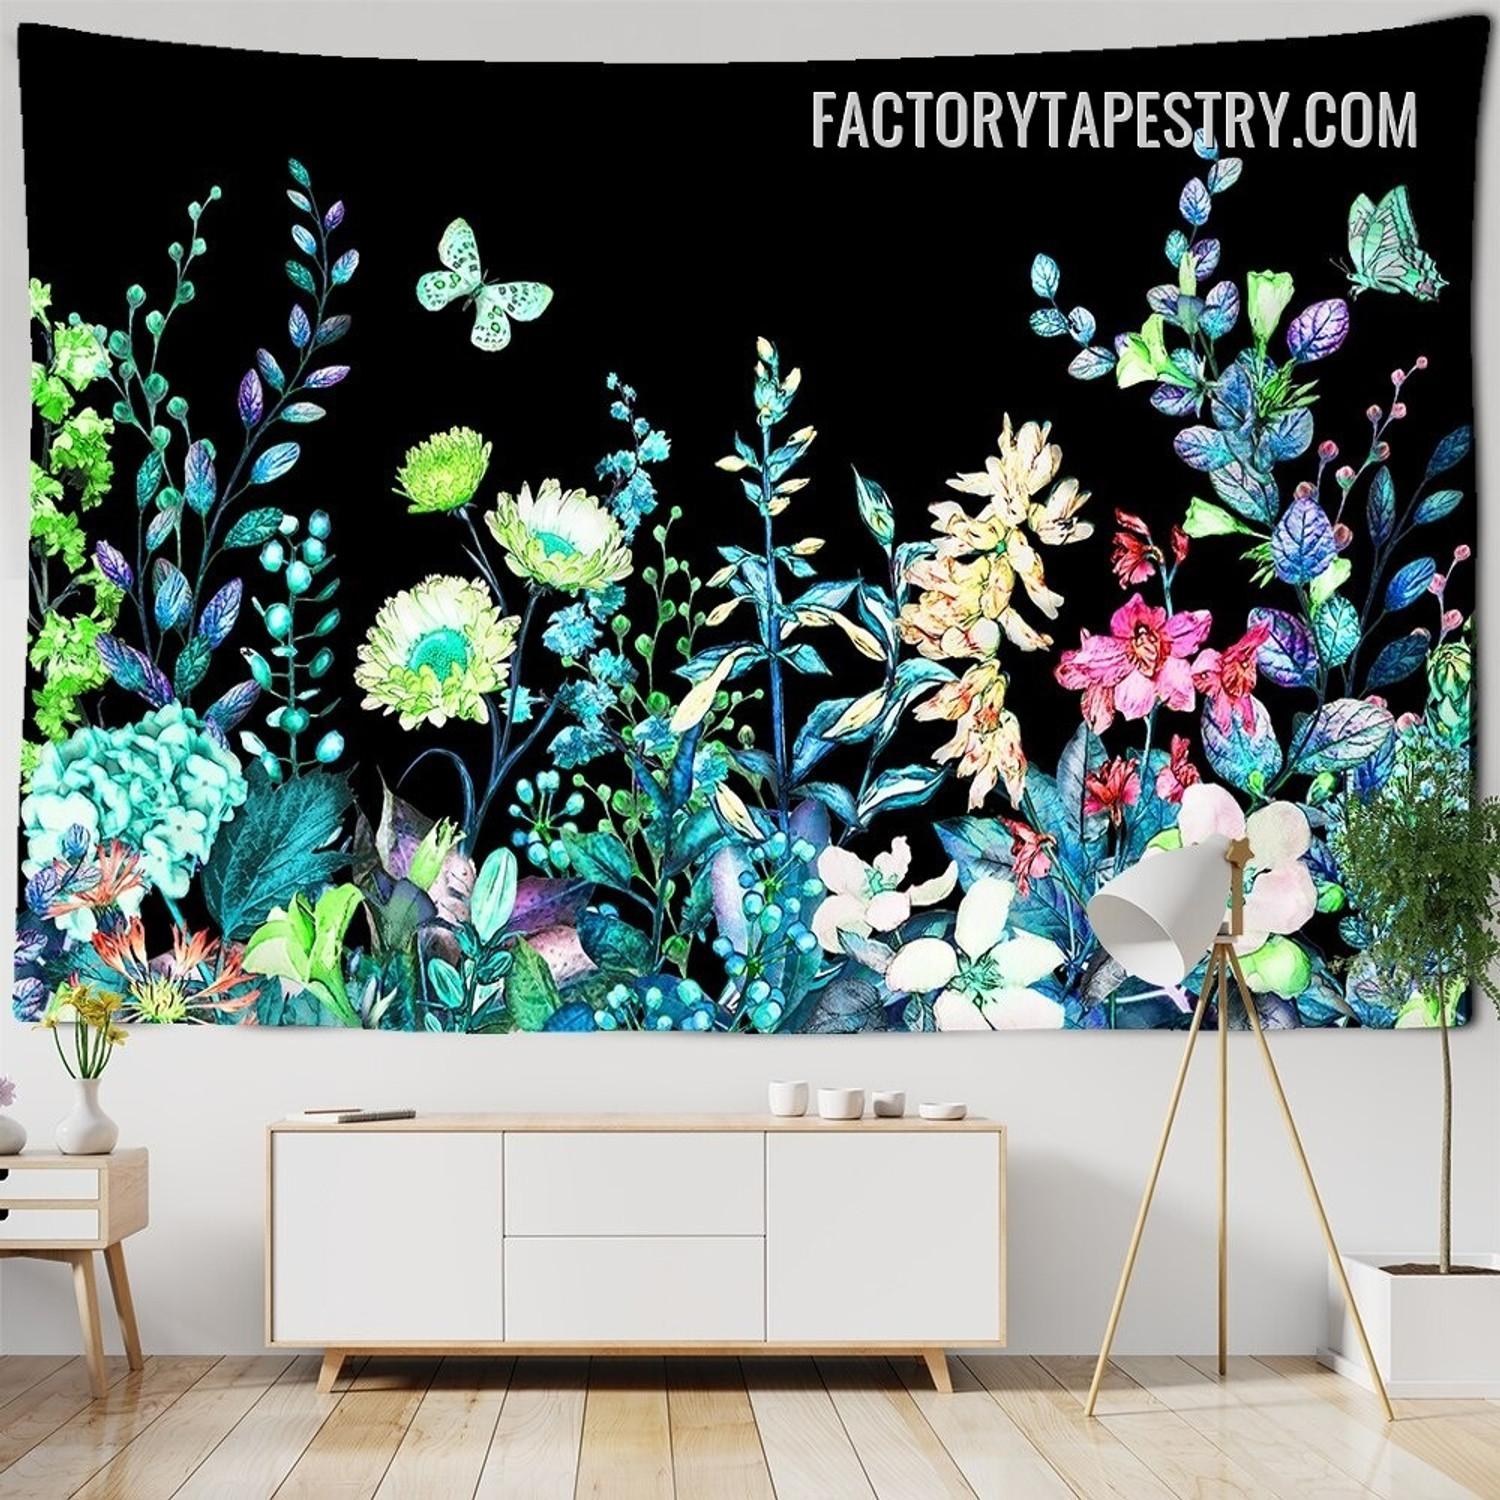 Botanical Wildflower Tapestry Floral Retro Wall Hanging Tapestries for Living Room Decoration